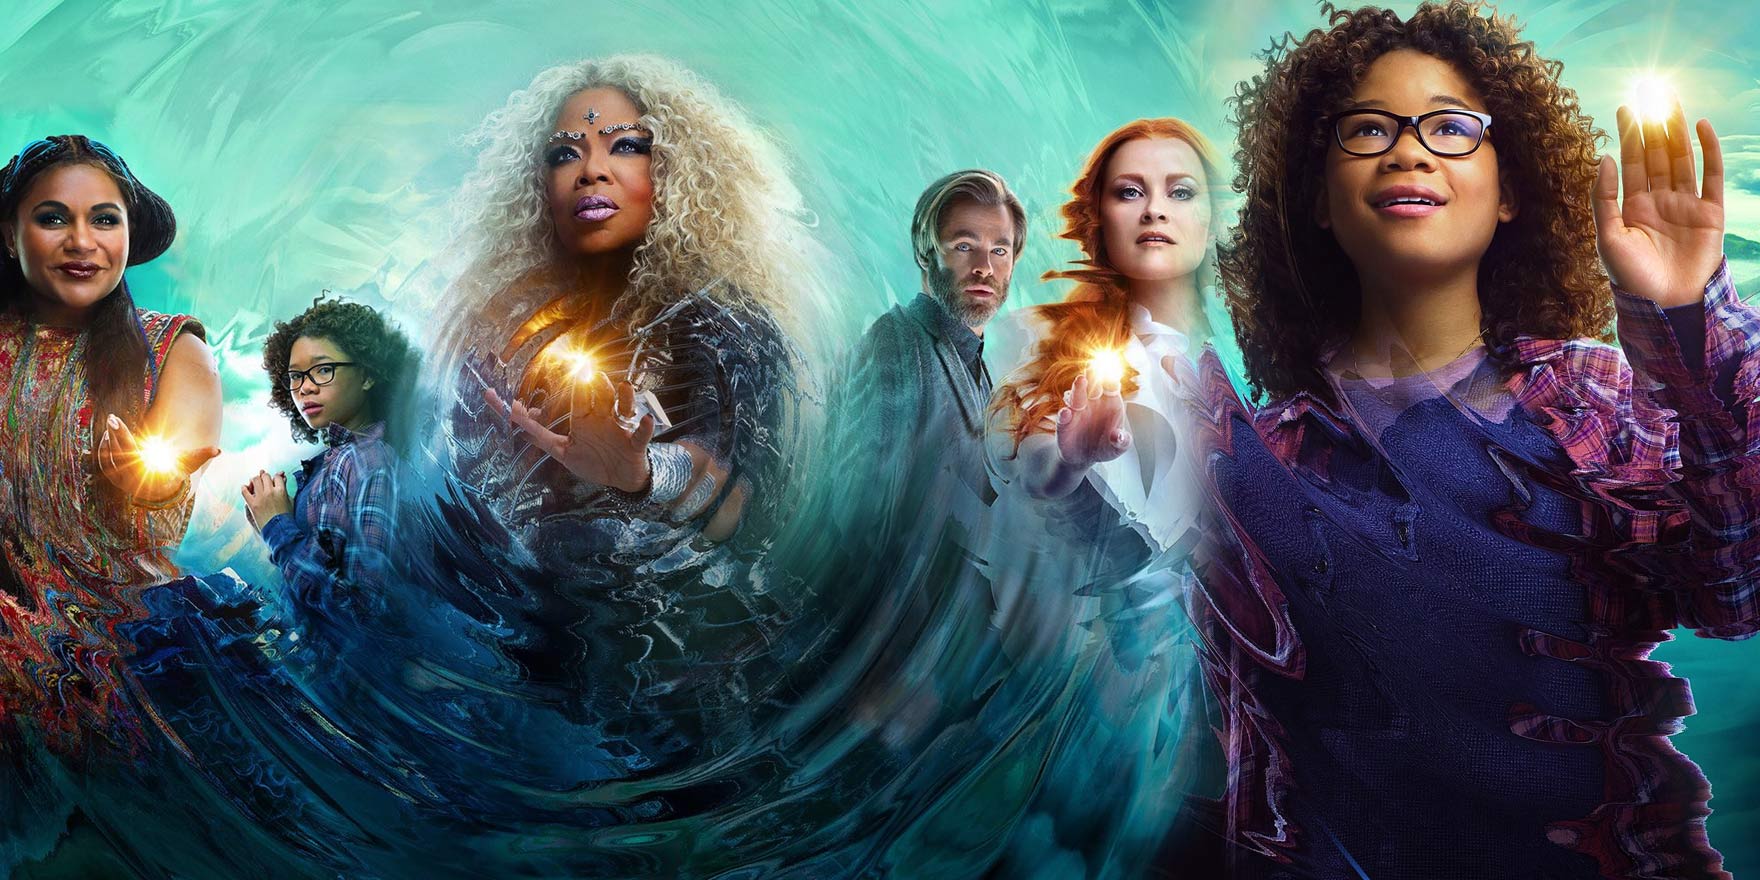 A Wrinkle in Time - Header Image